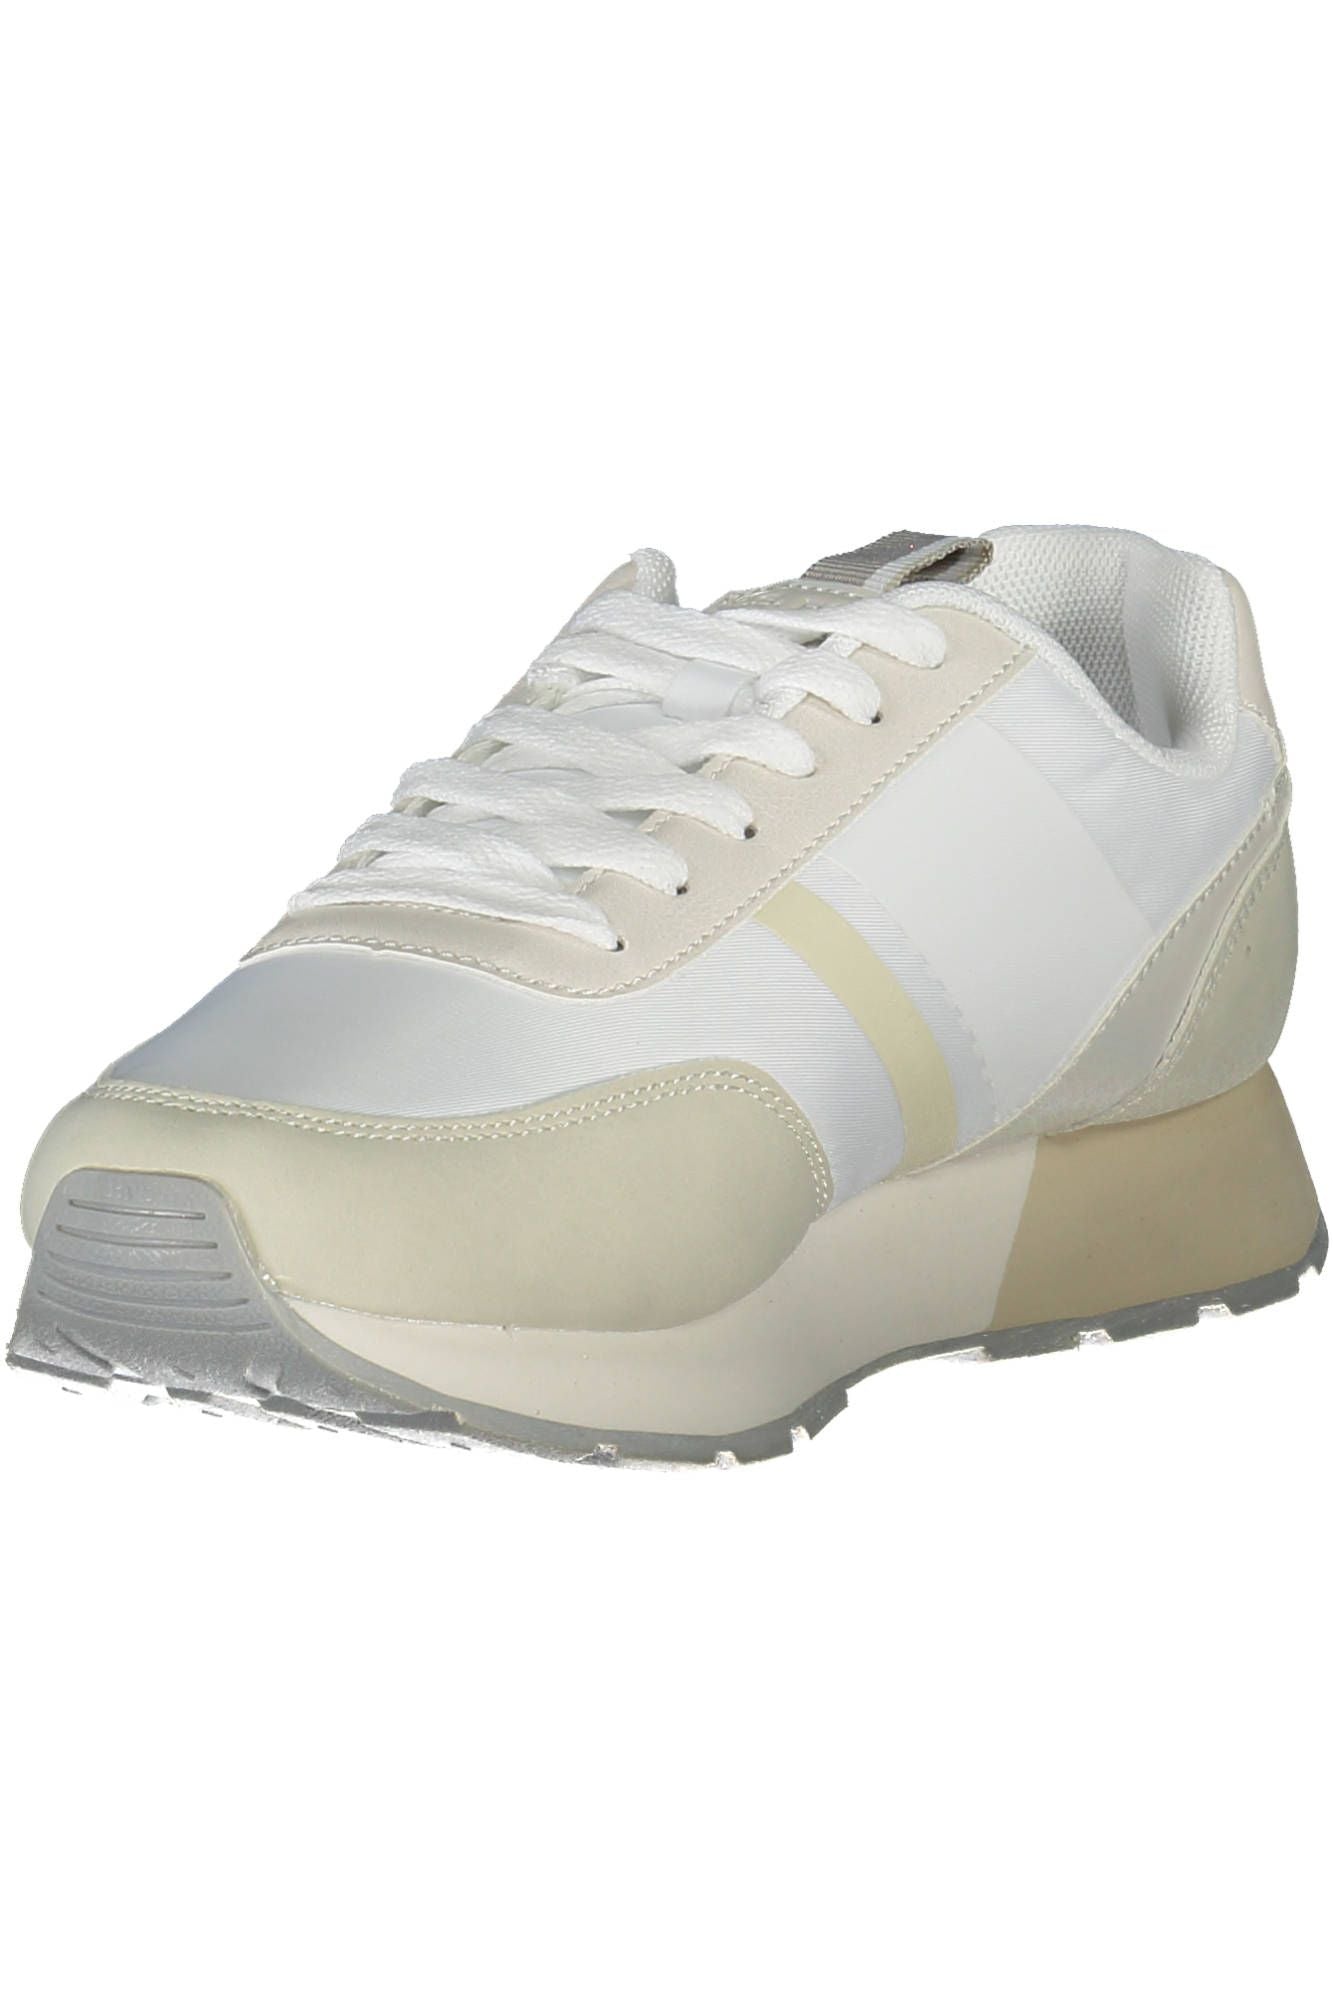 U.S. POLO ASSN. Elegant White Lace-Up Sneakers